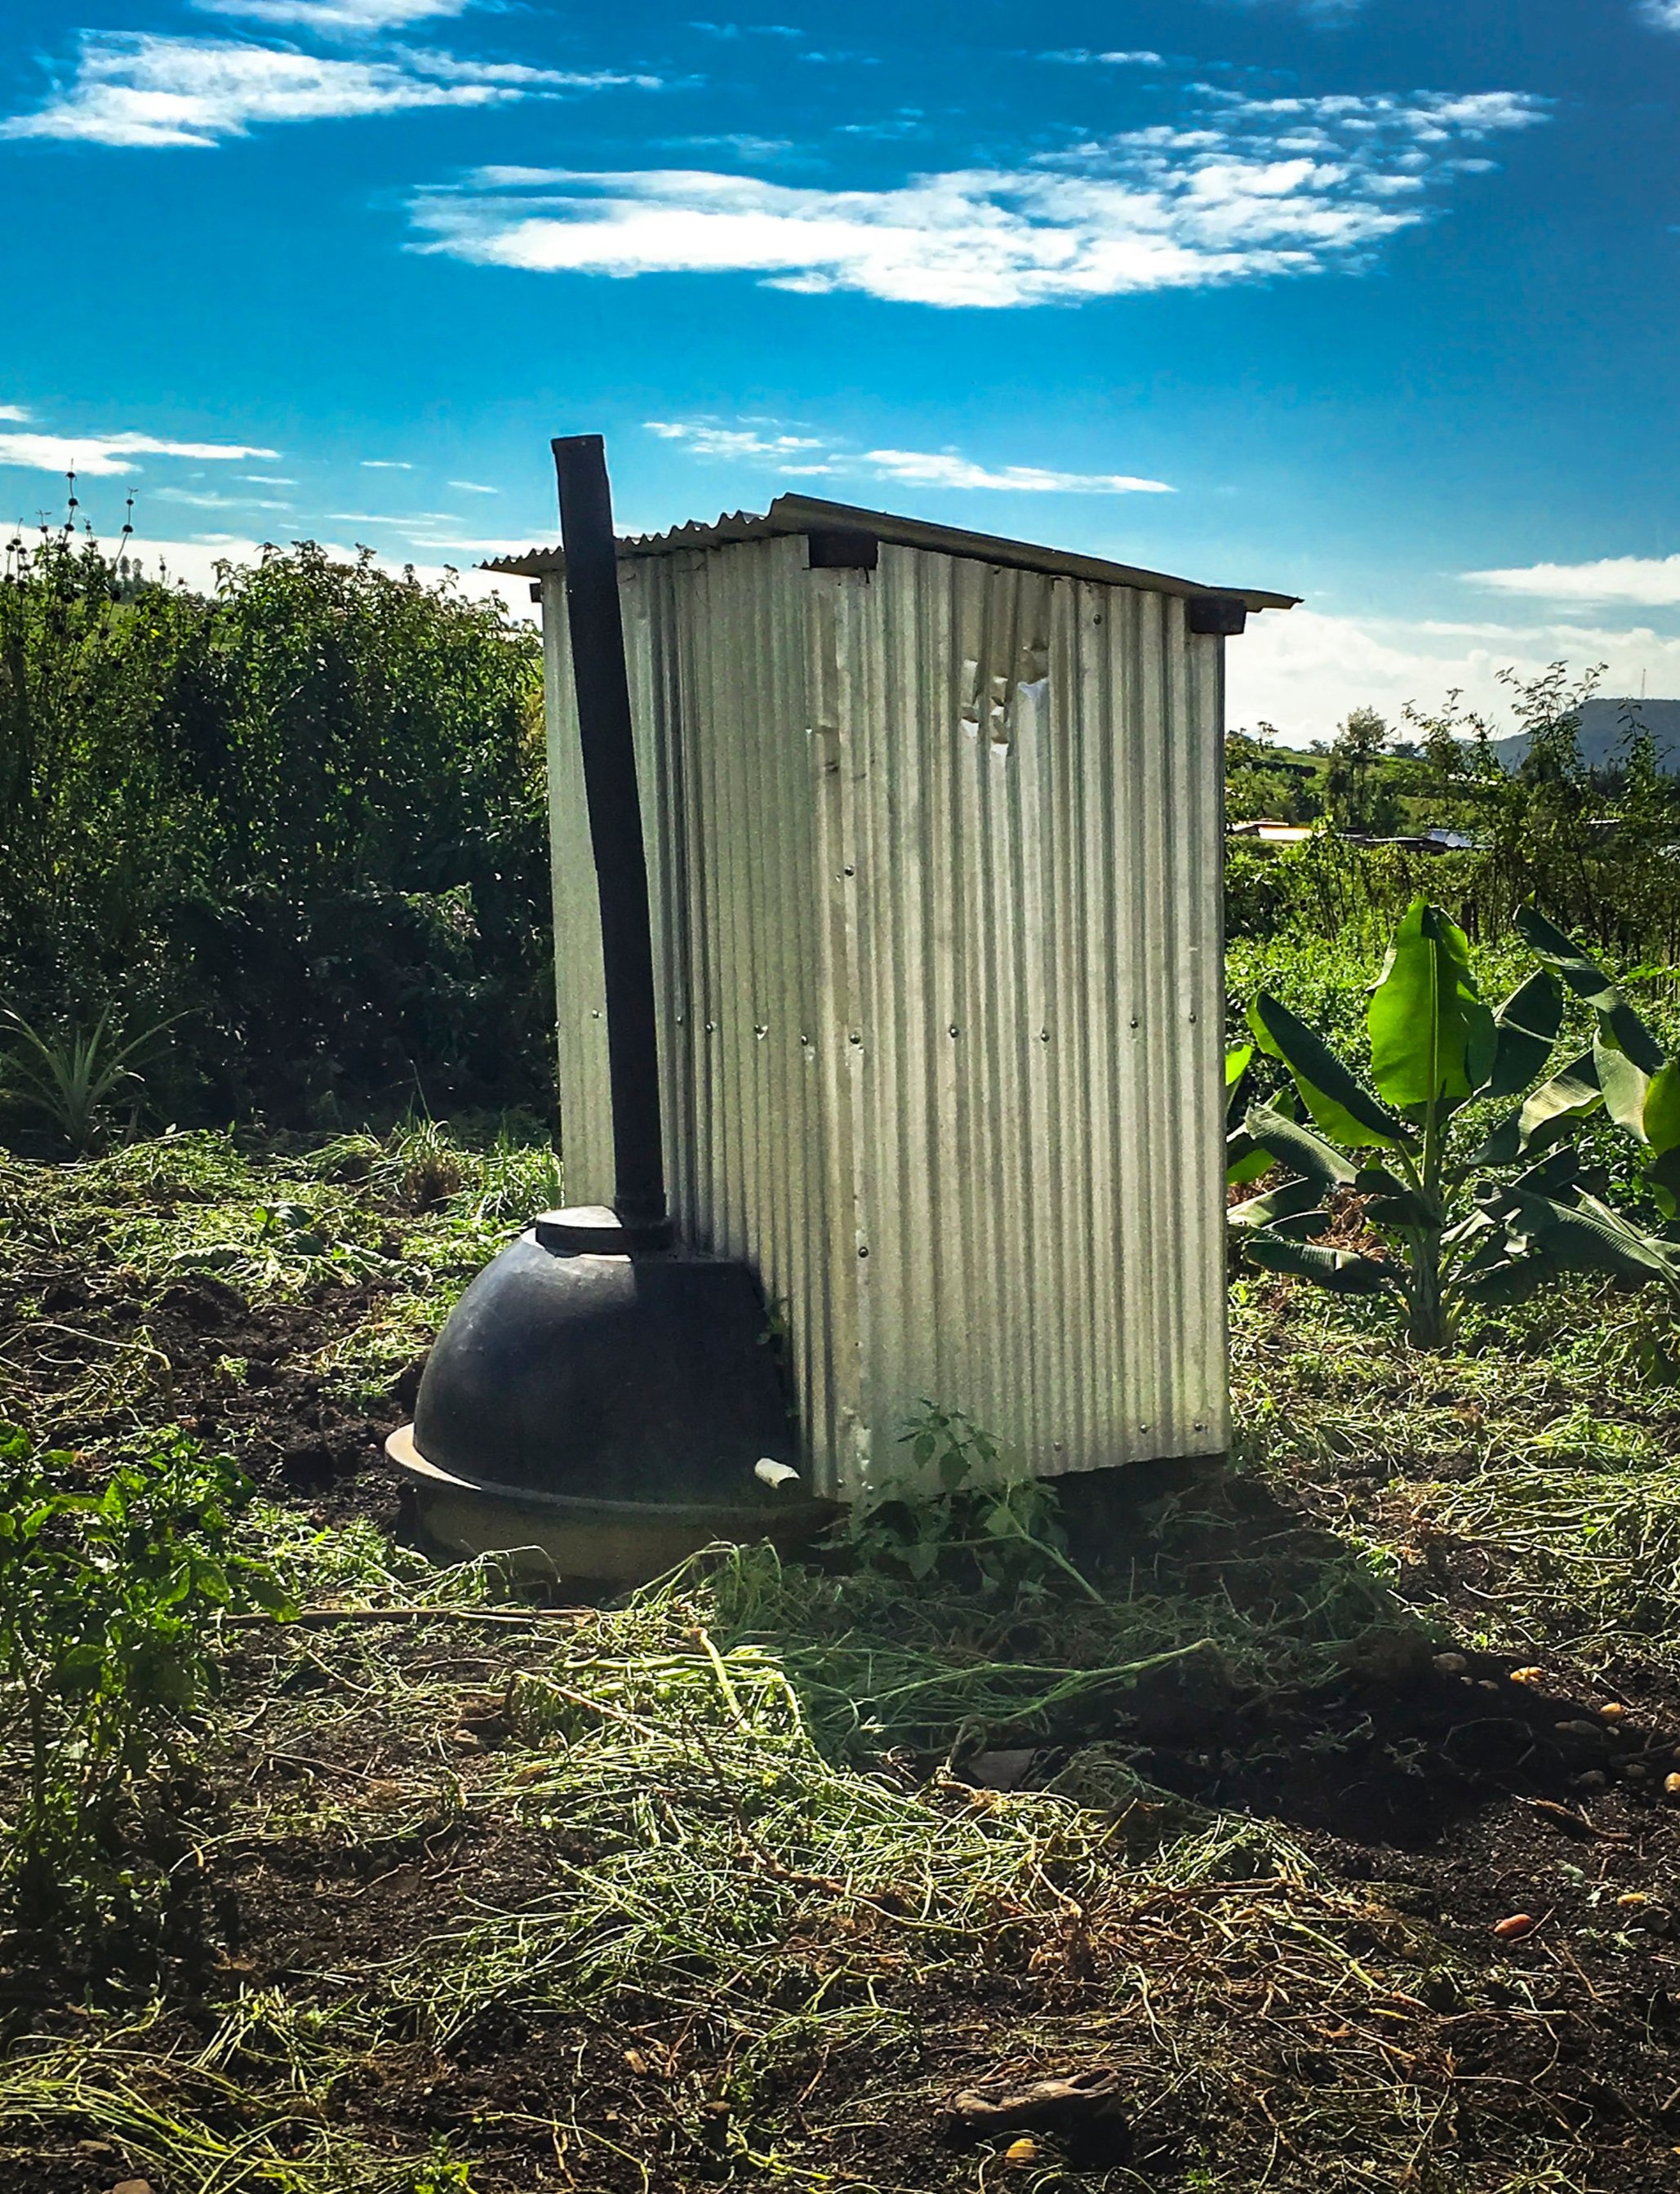 A composting toilet in the compound